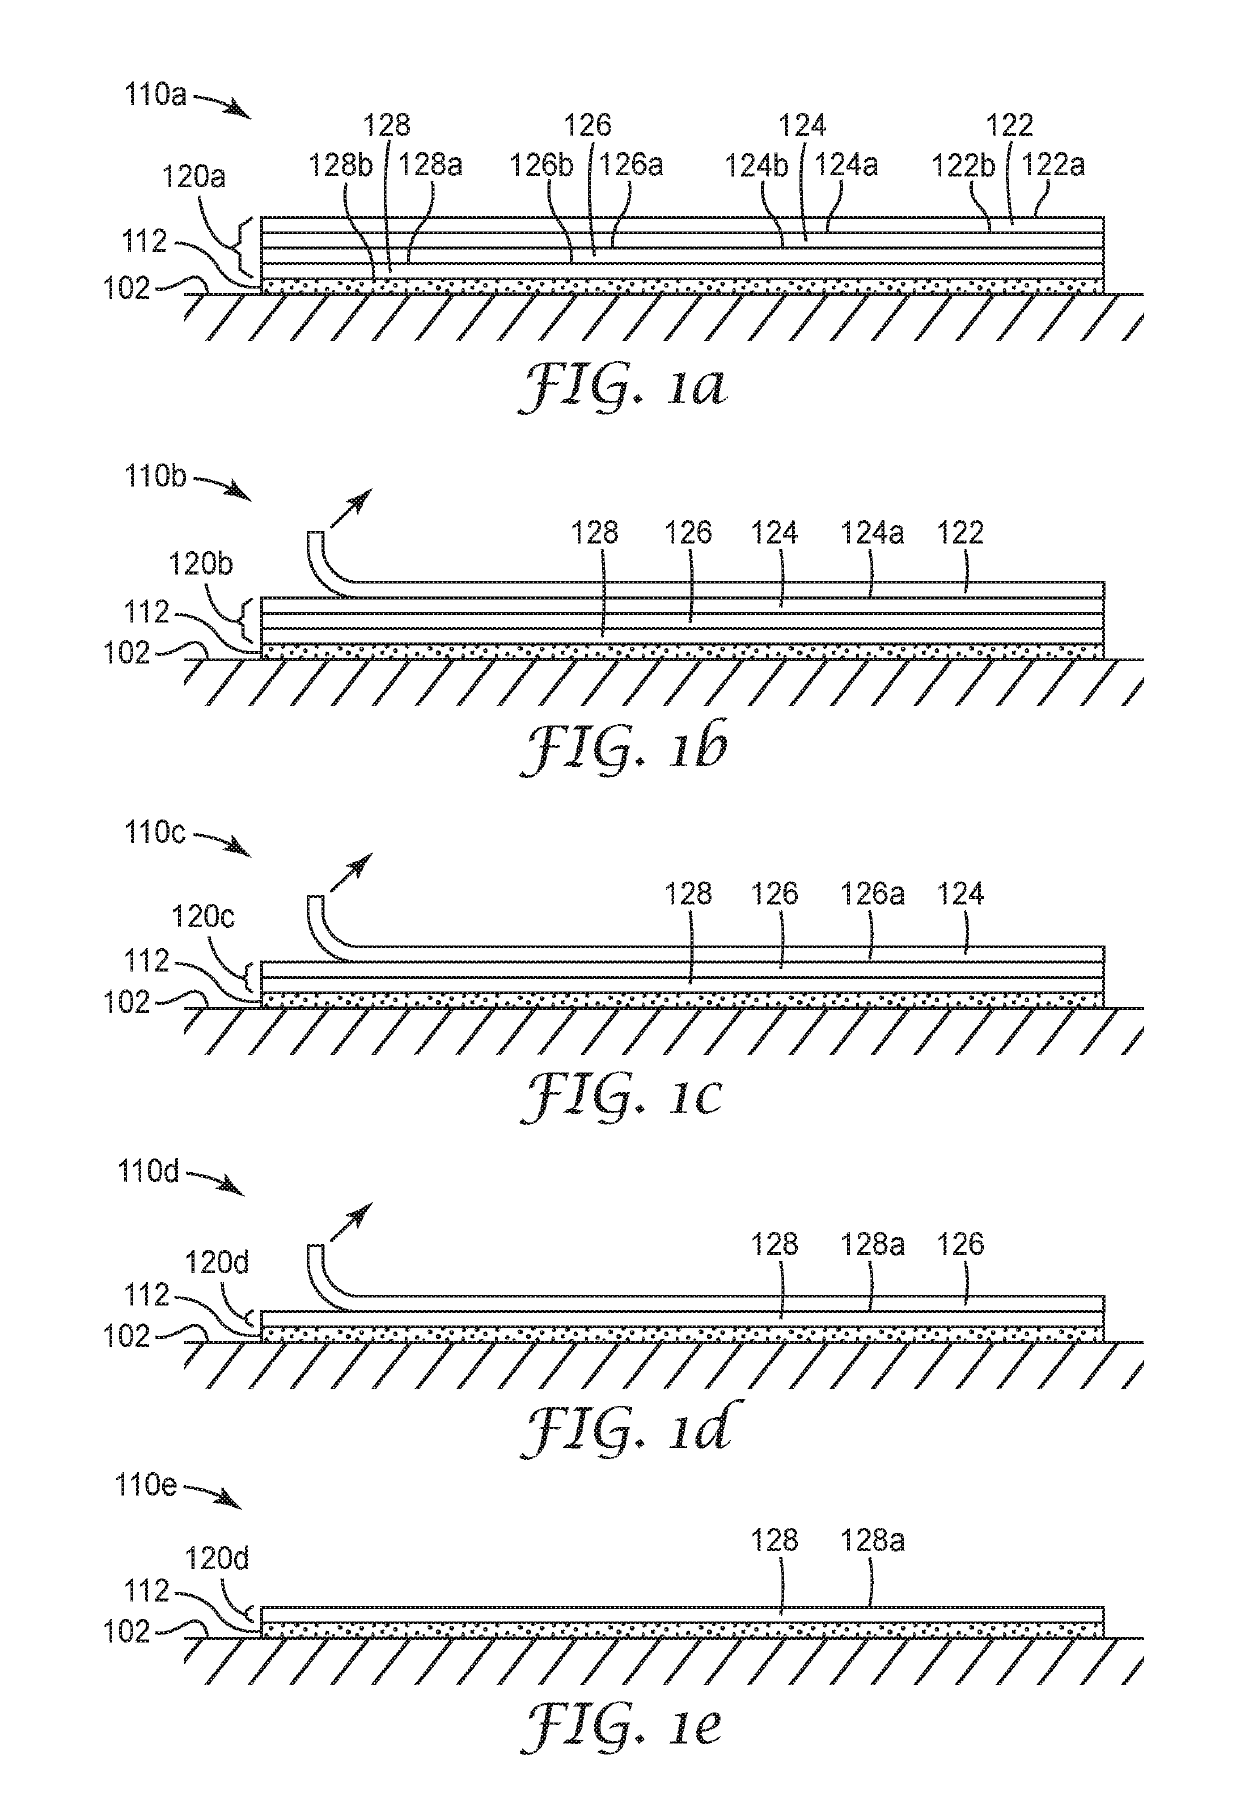 Coextruded polymer film configured for successive irreversible delamination